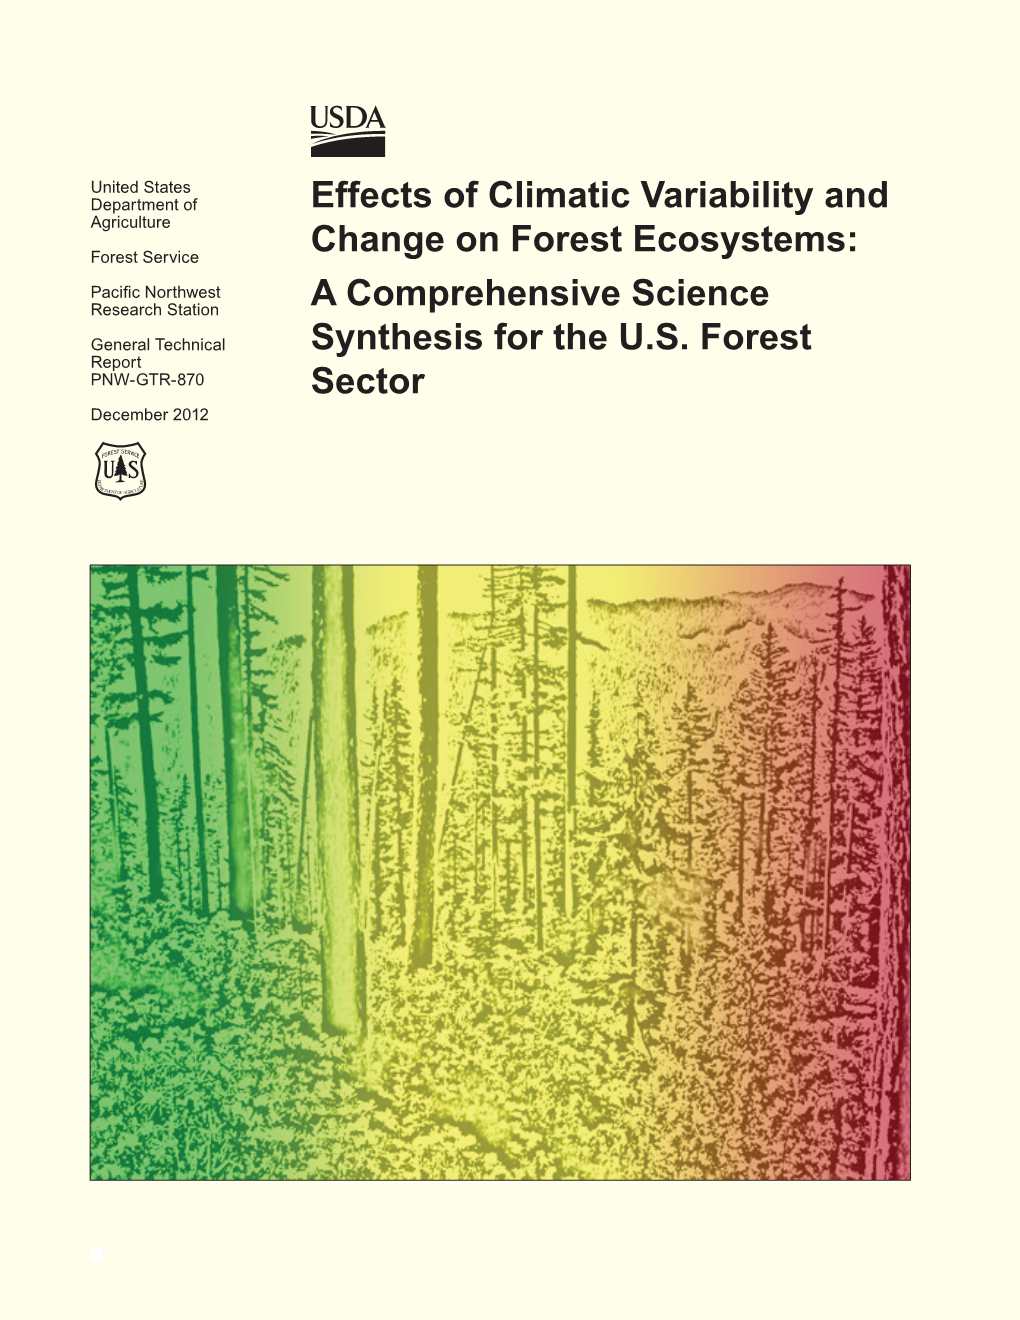 Effects of Climatic Variability and Change on Forest Ecosystems: a Comprehensive Science Synthesis for the U.S. Forest Sector